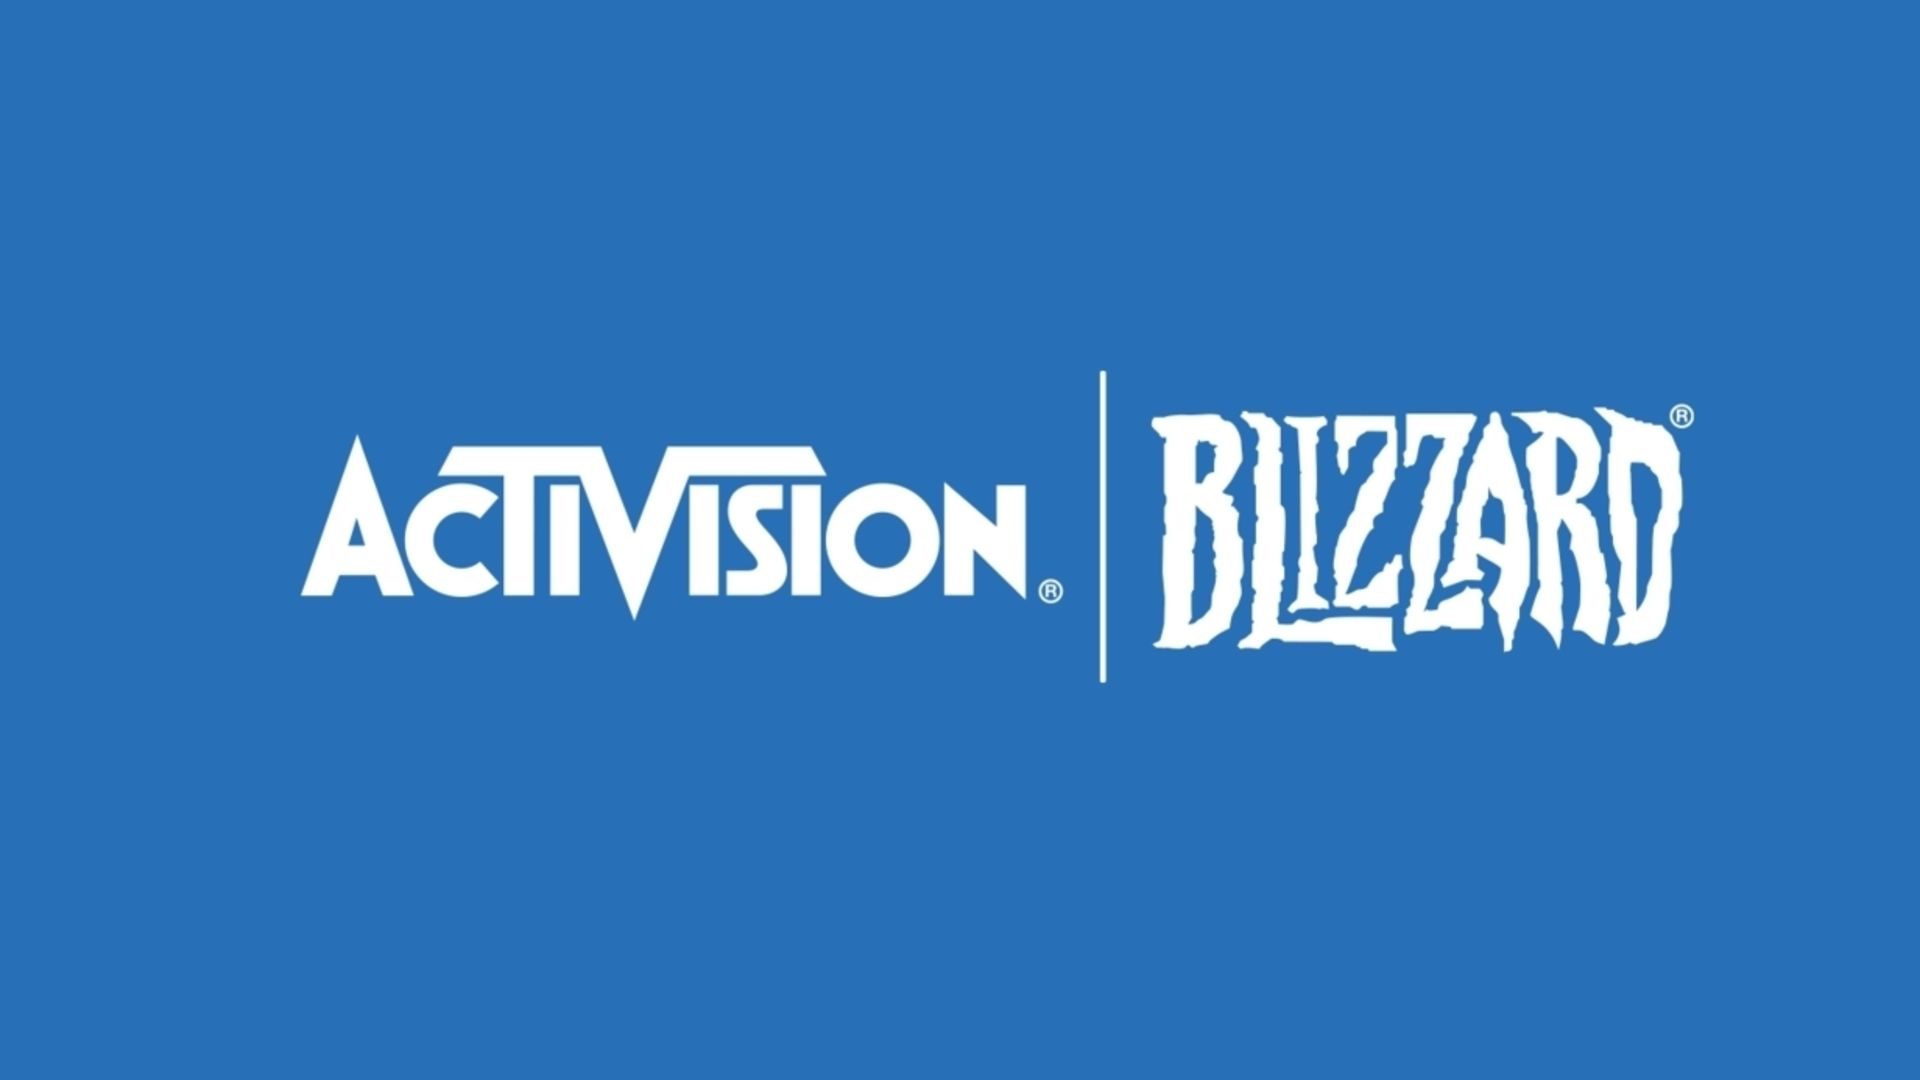 activision workplace responsibility committee bobby kotick